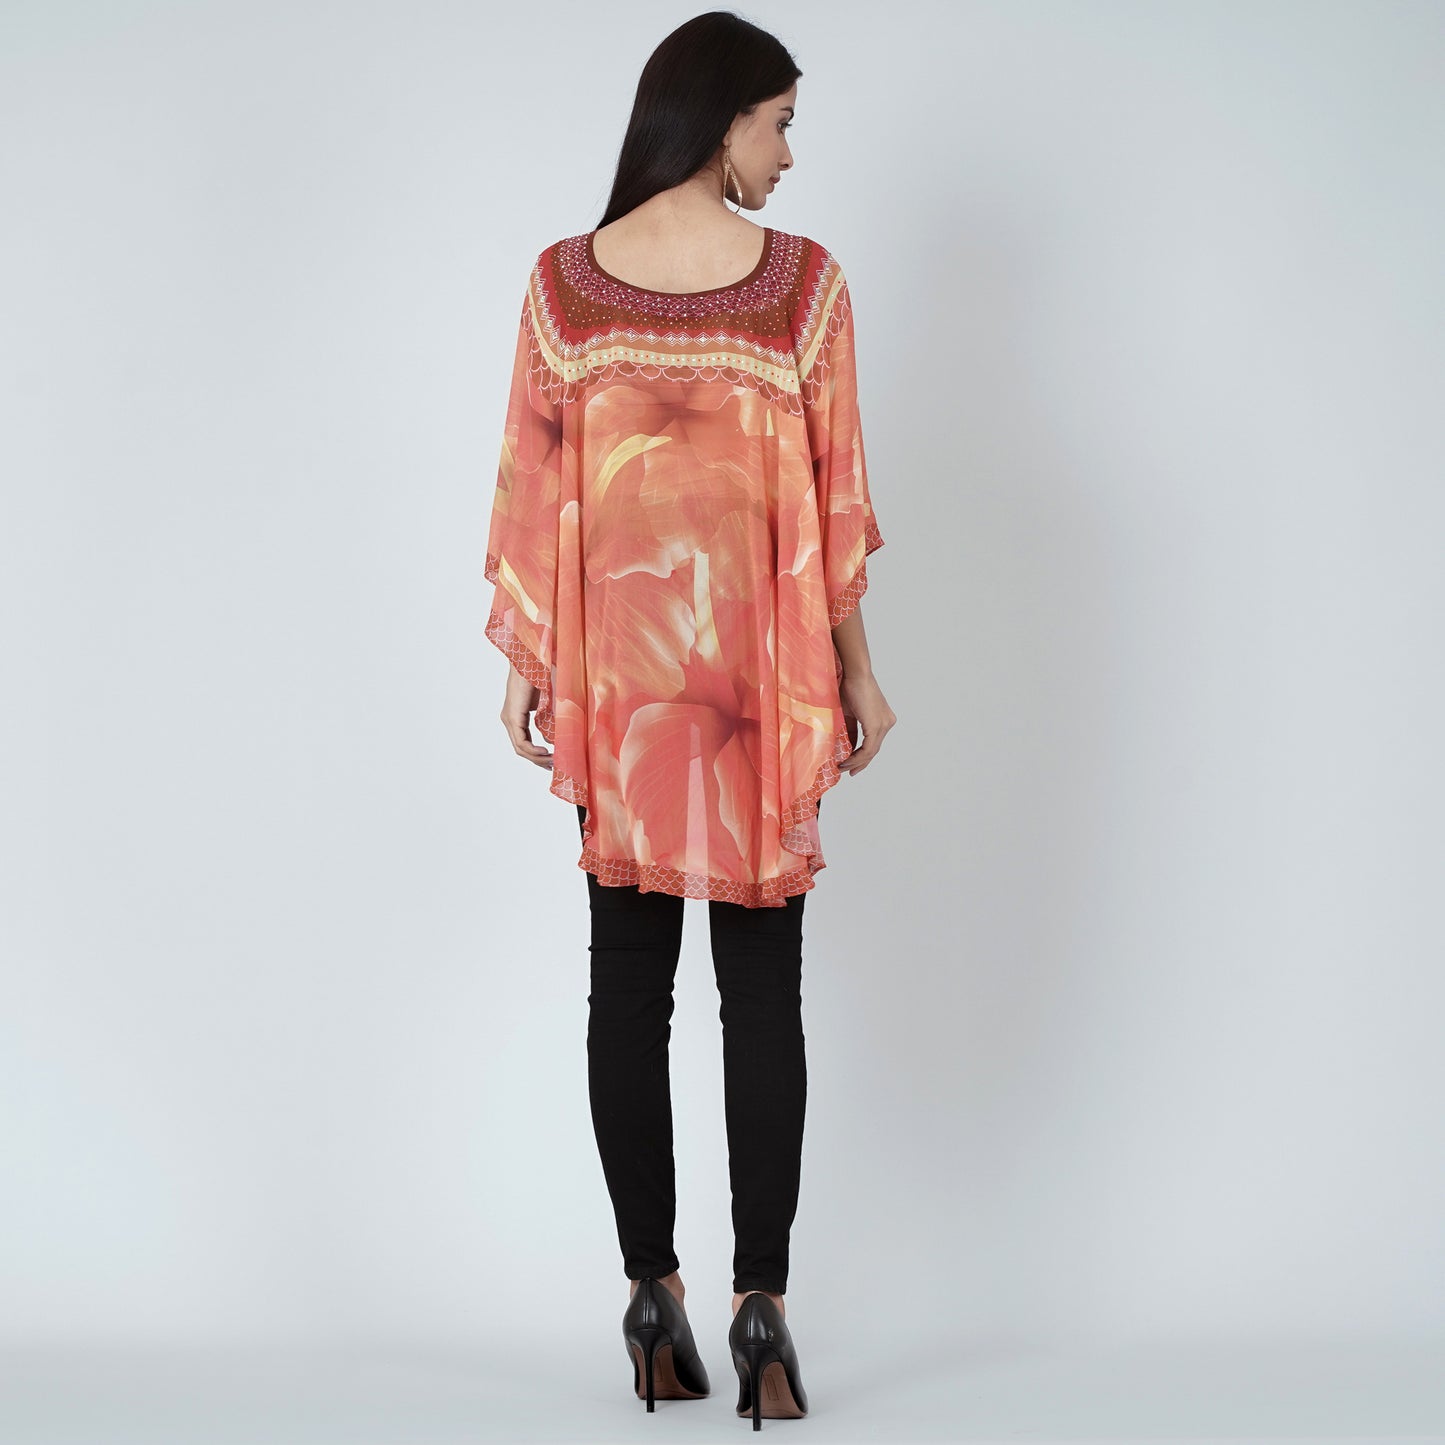 Orange and Red Embellished Floral Tunic